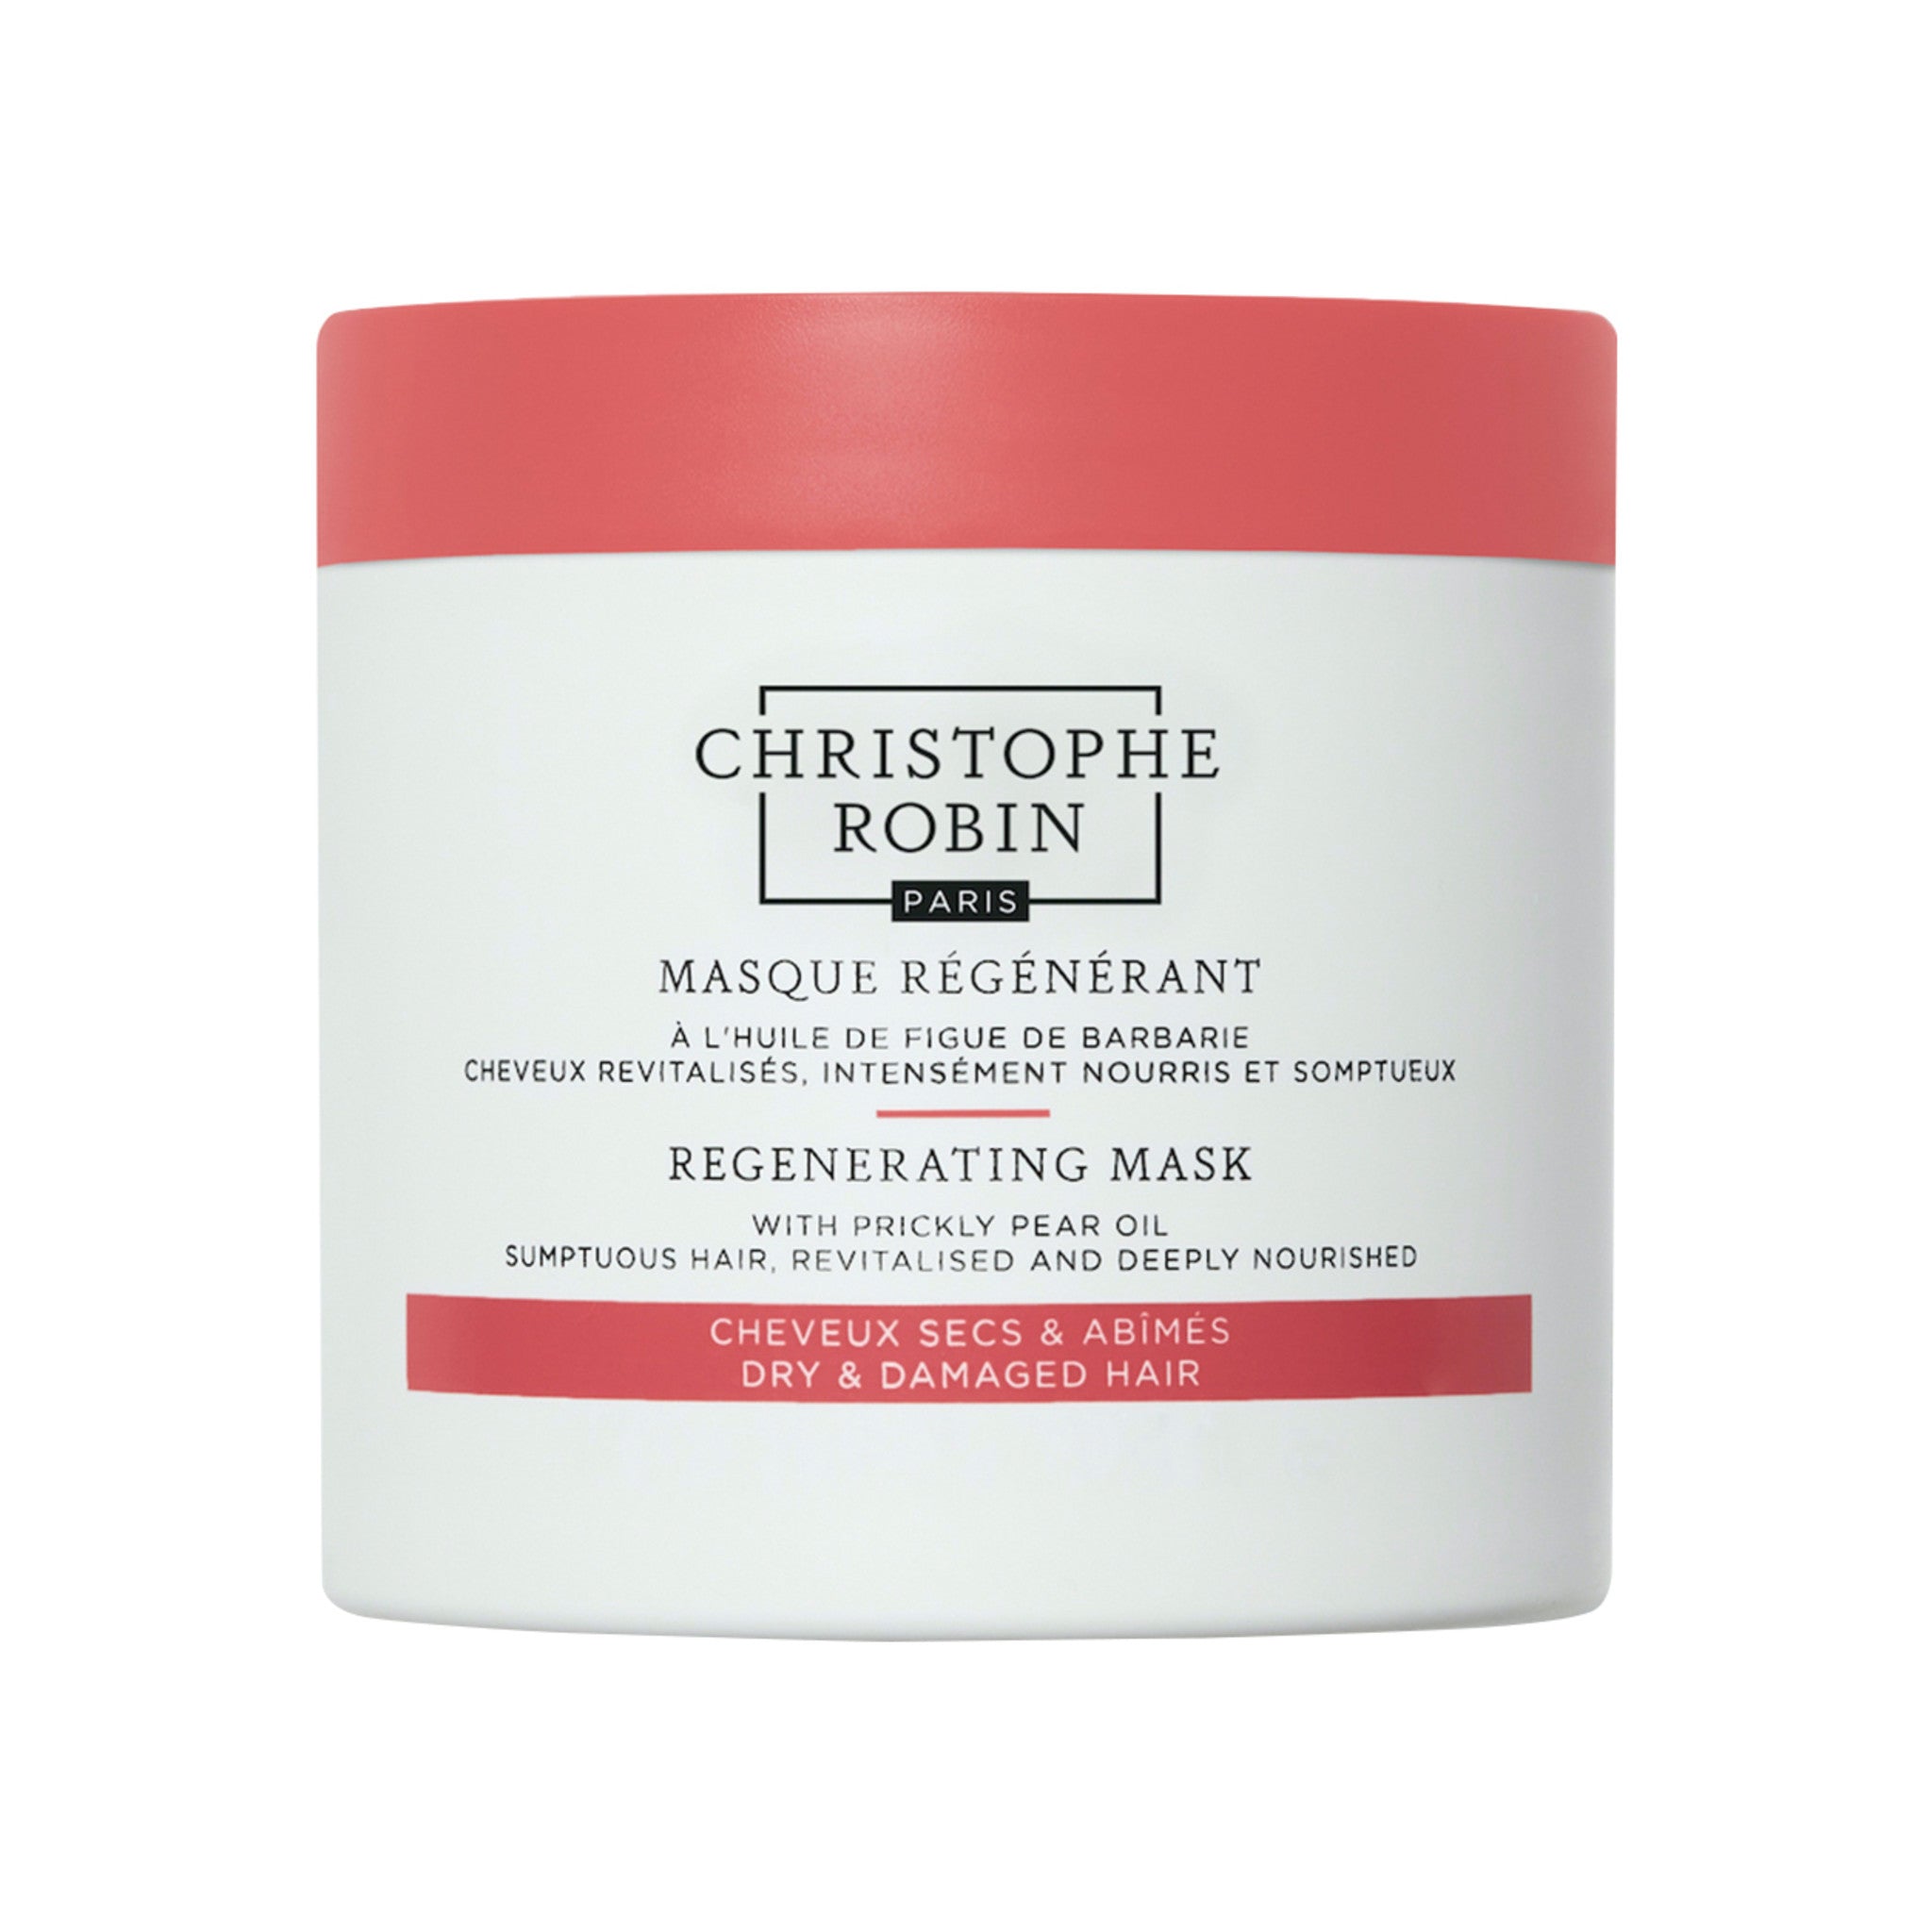 Christophe Robin Regenerating Mask With Rare Prickly Pear Seed Oil Size variant: 8.4 fl oz main image.